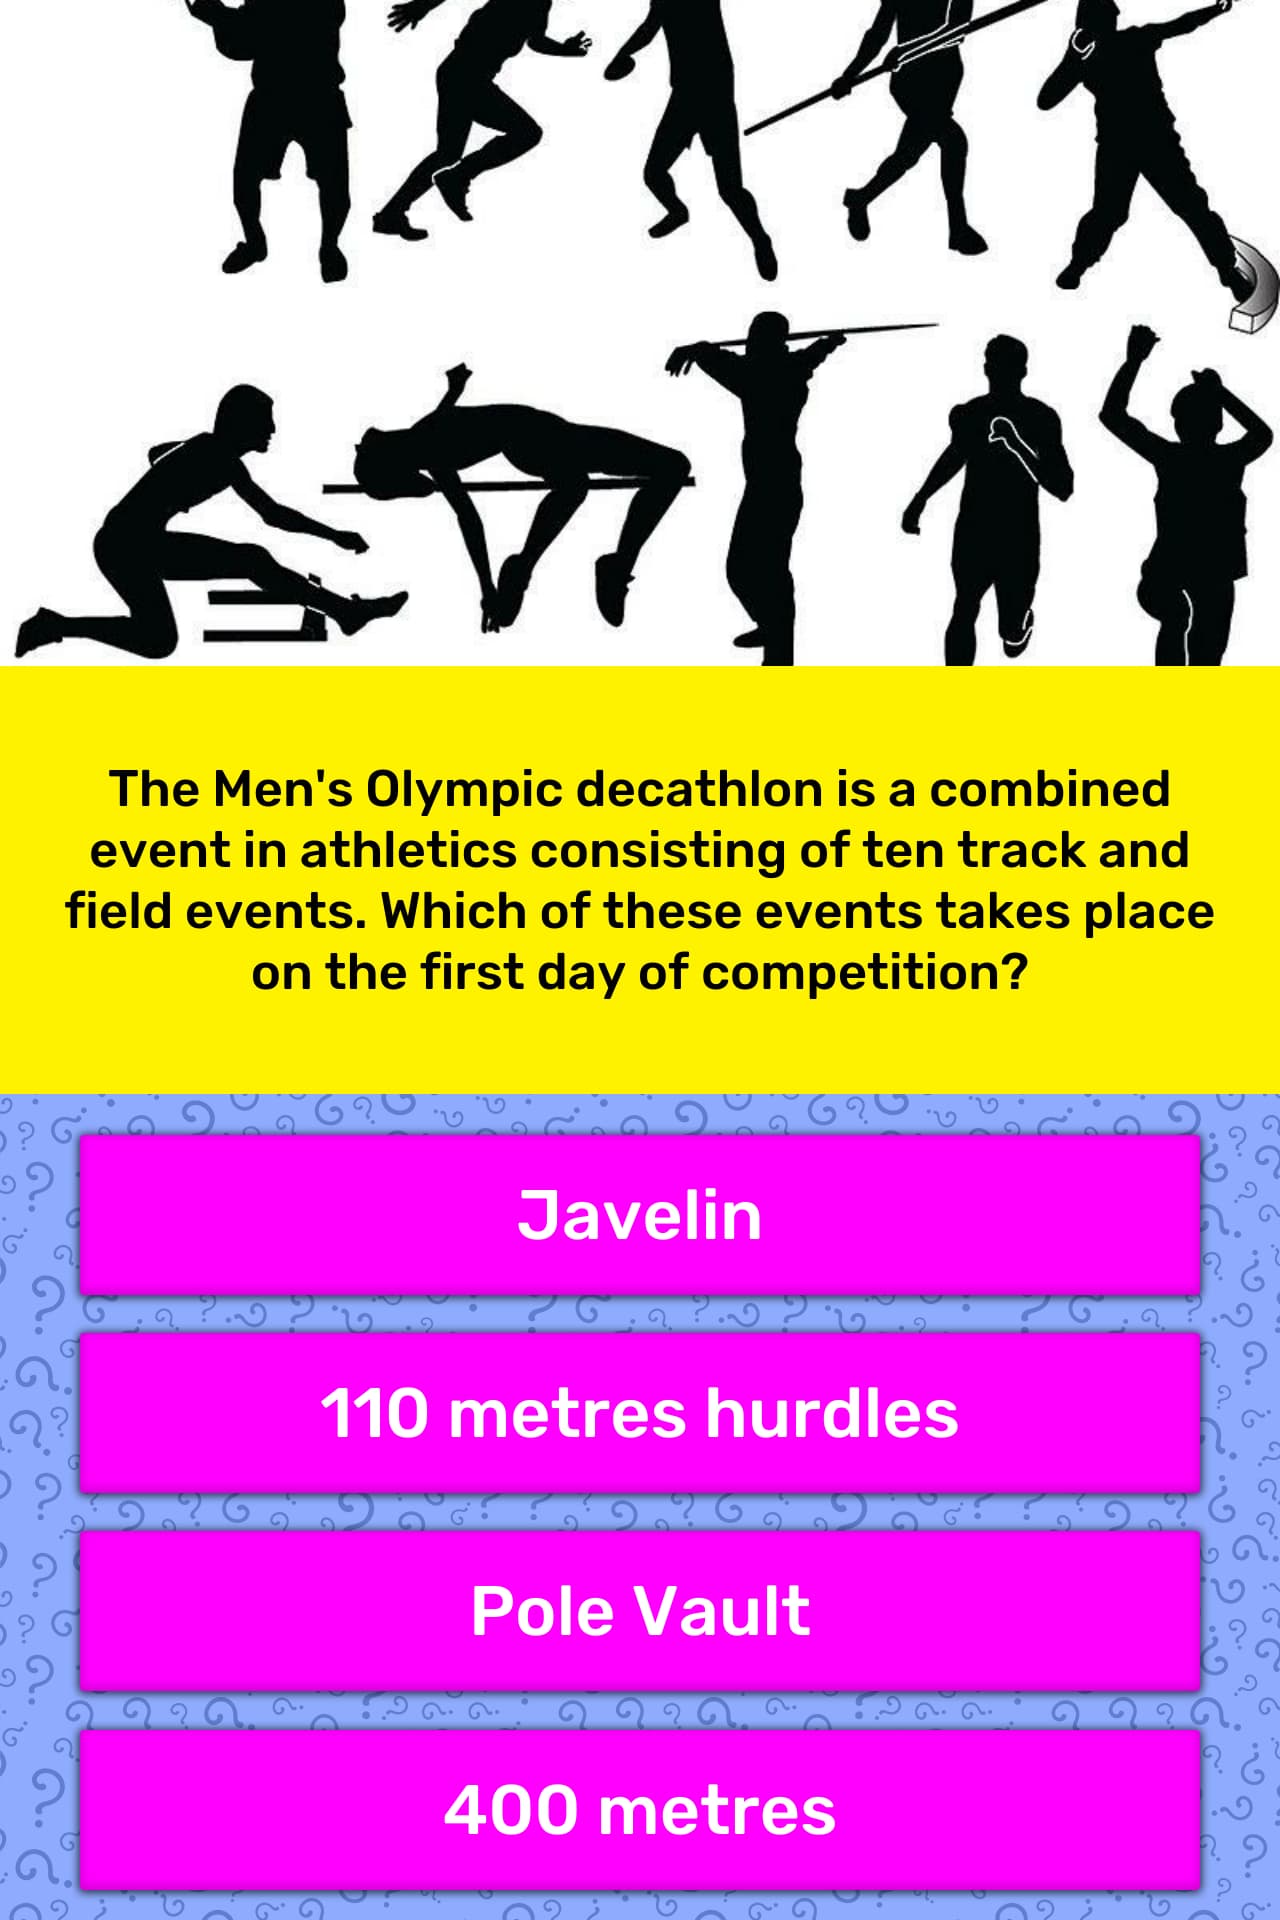 10 events in a decathlon